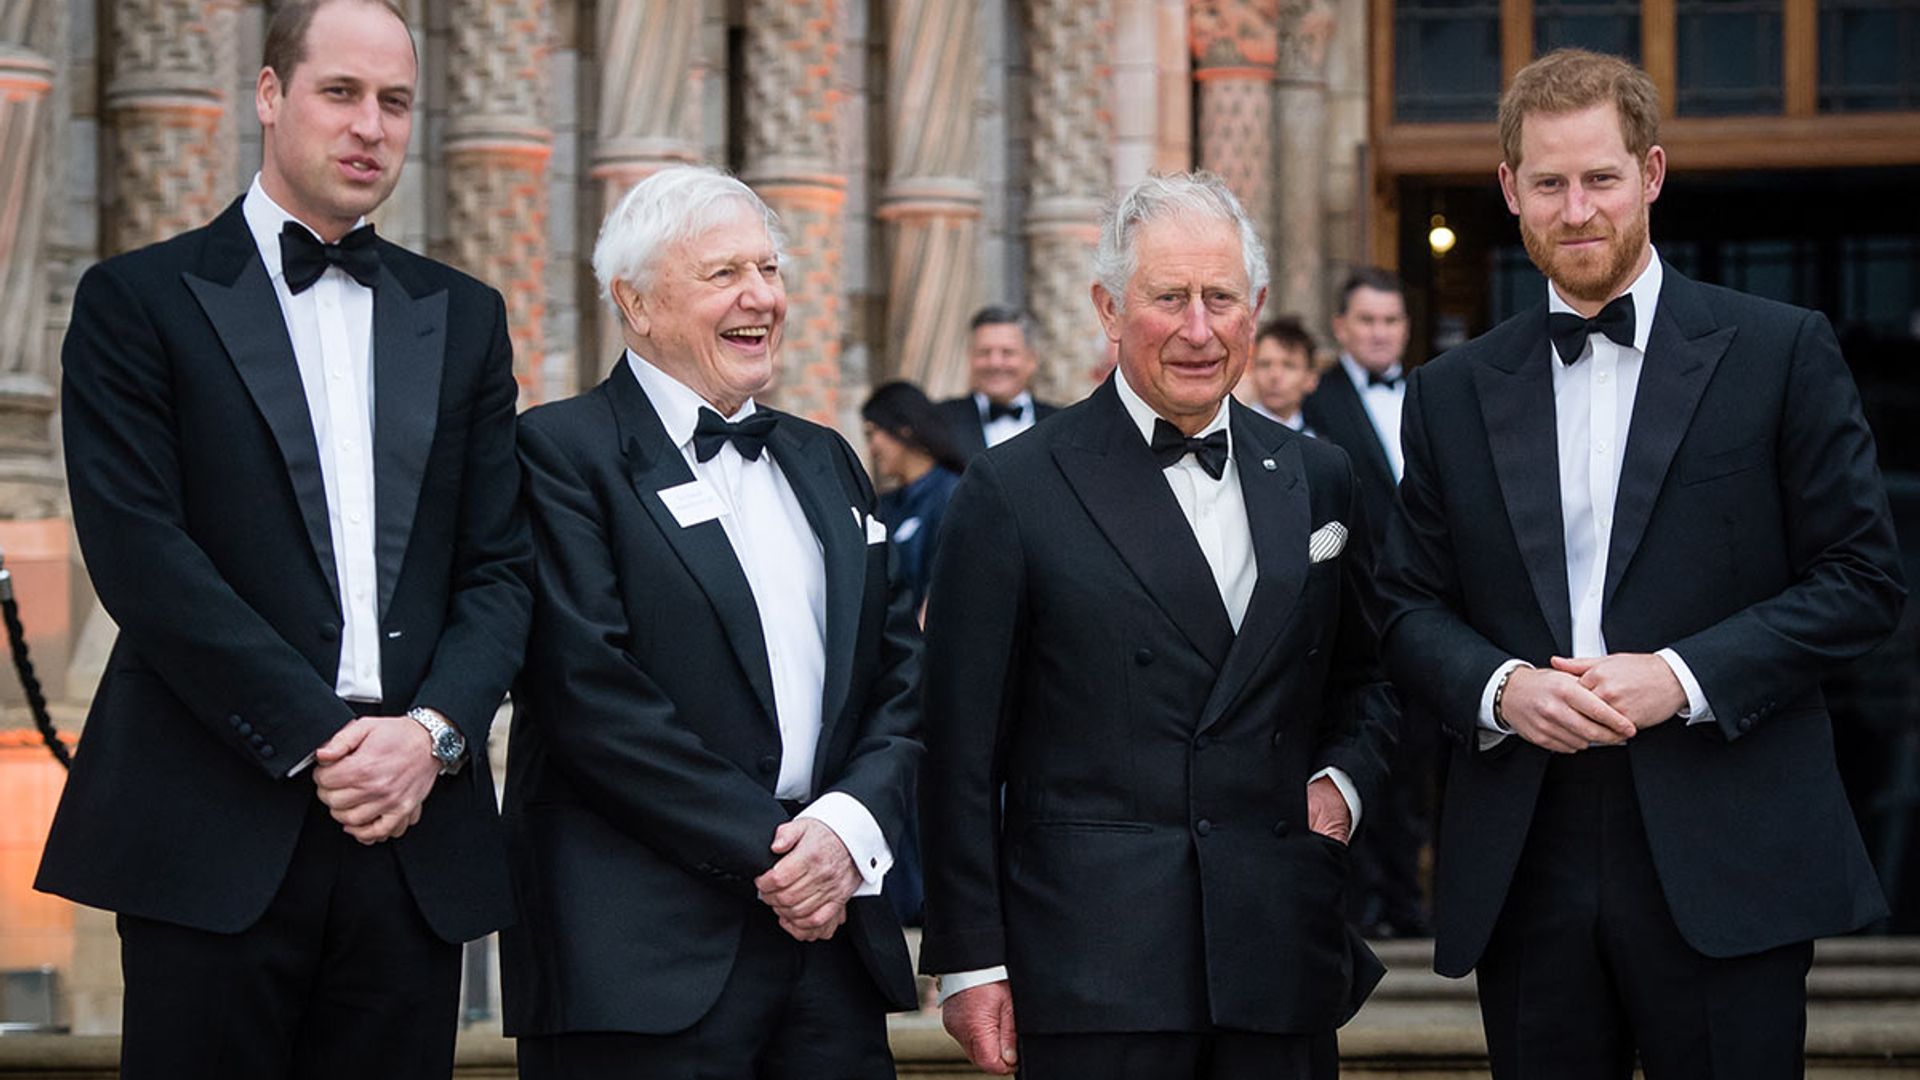 Prince William, Prince Harry and Prince Charles don matching tuxedos for  joint engagement | HELLO!